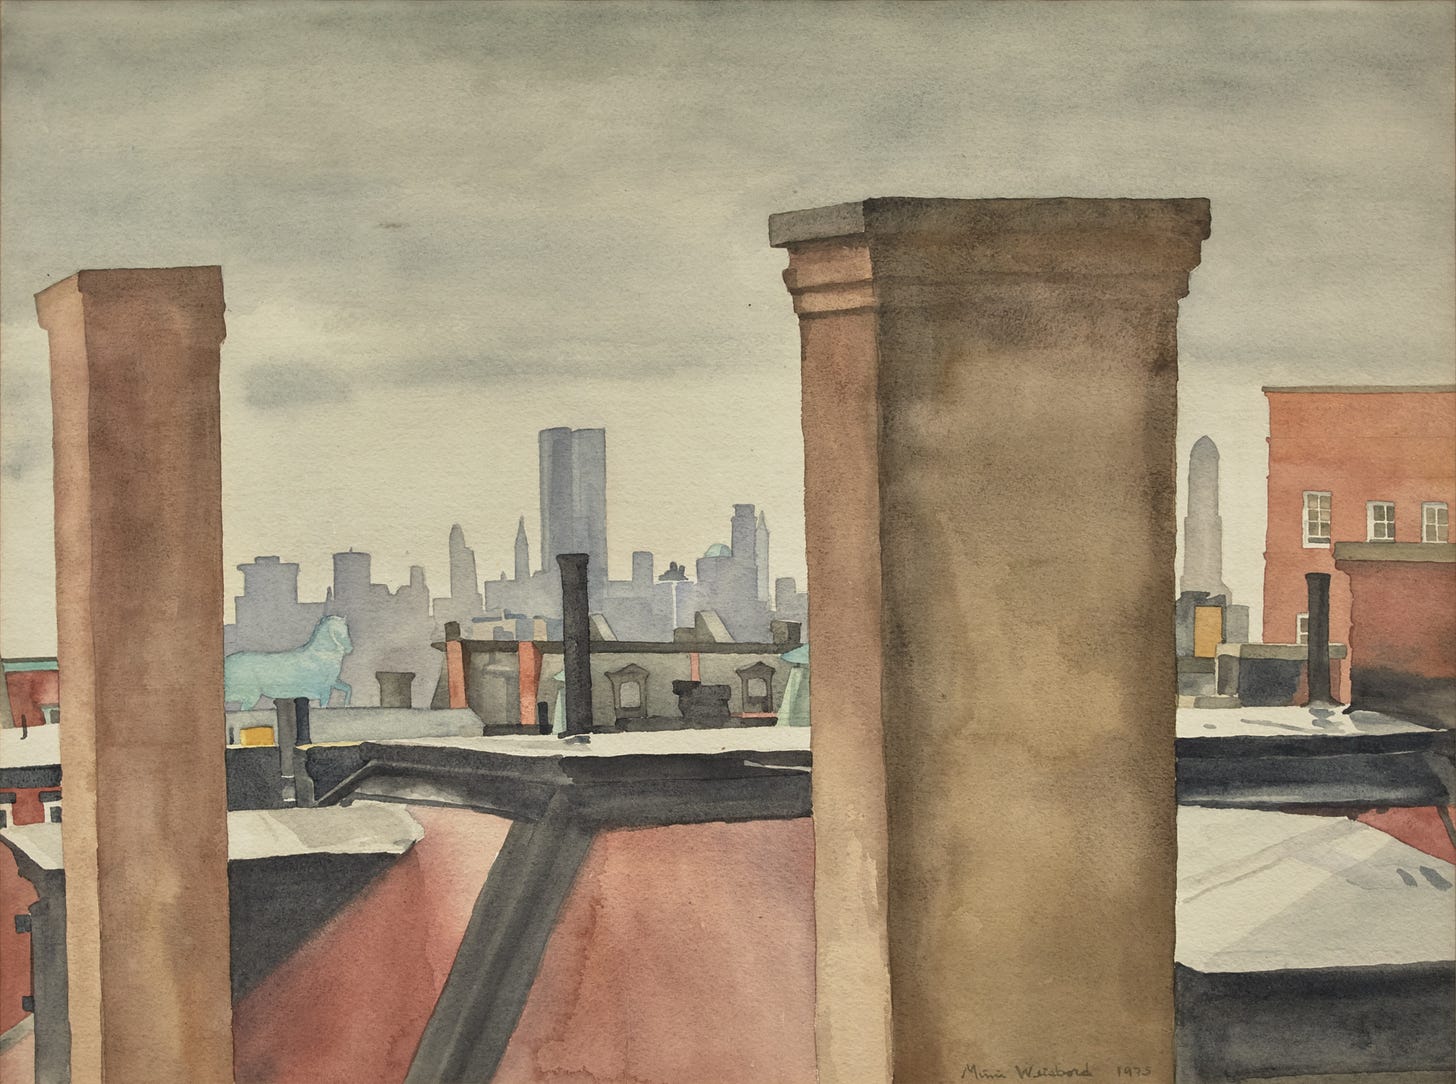 Brooklyn rooftops and chimneys with a copper colored horse peeking up. In the background is the Manhattan skyline including the Twin Towers.